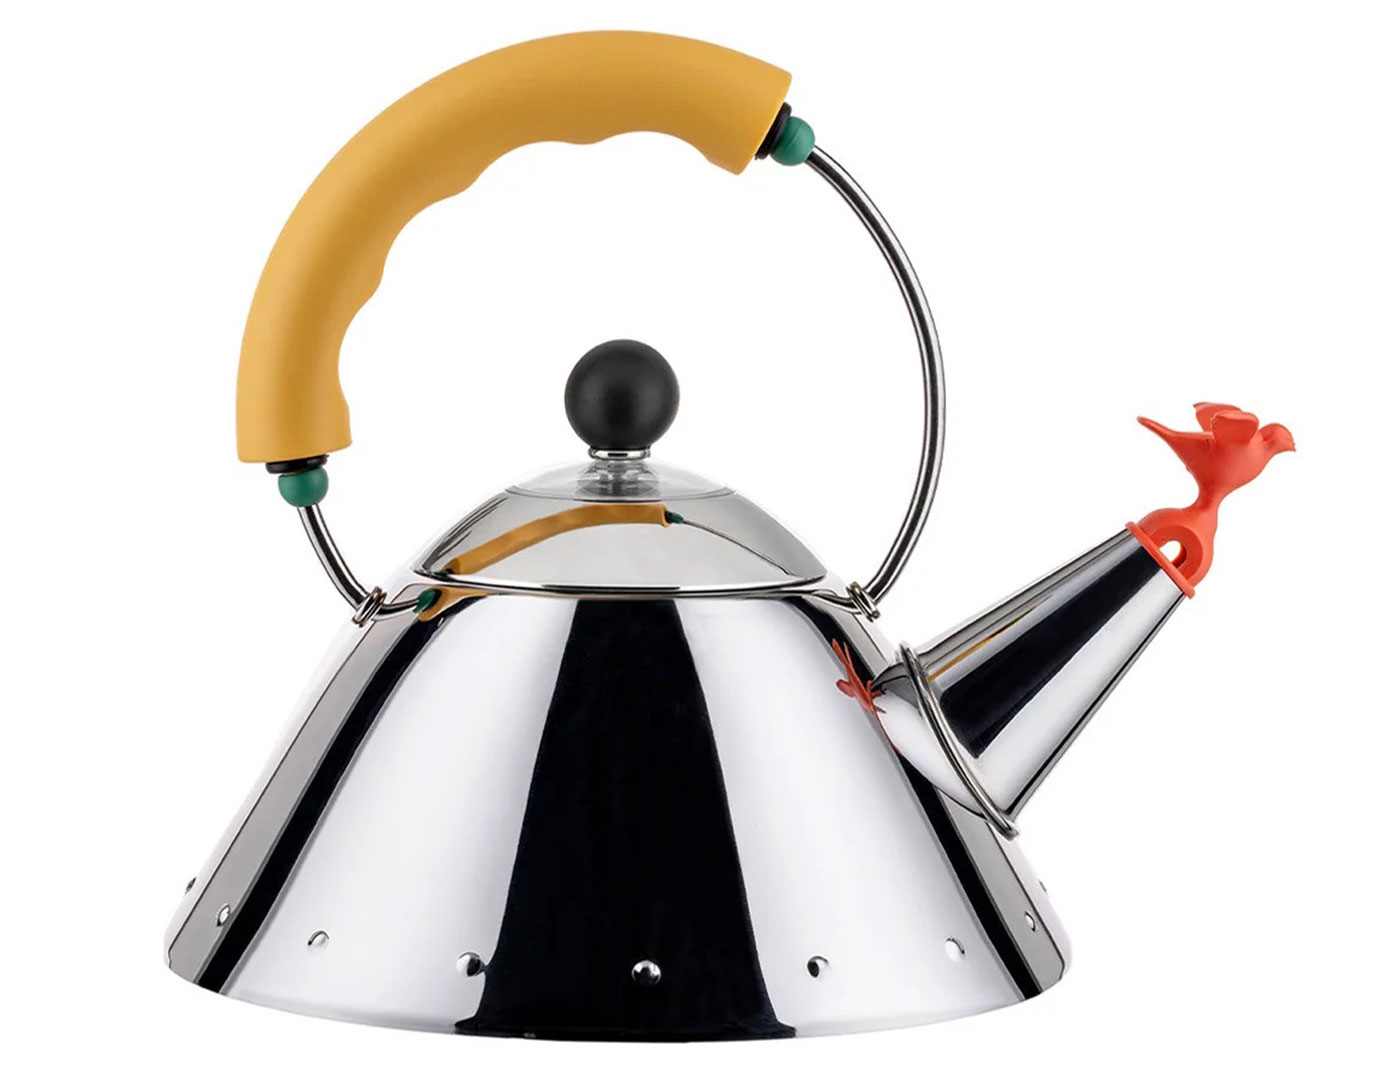 https://hivemodern.com/public_resources/full/michael-graves-small-kettle-alessi-9093-c4a3637583.jpg